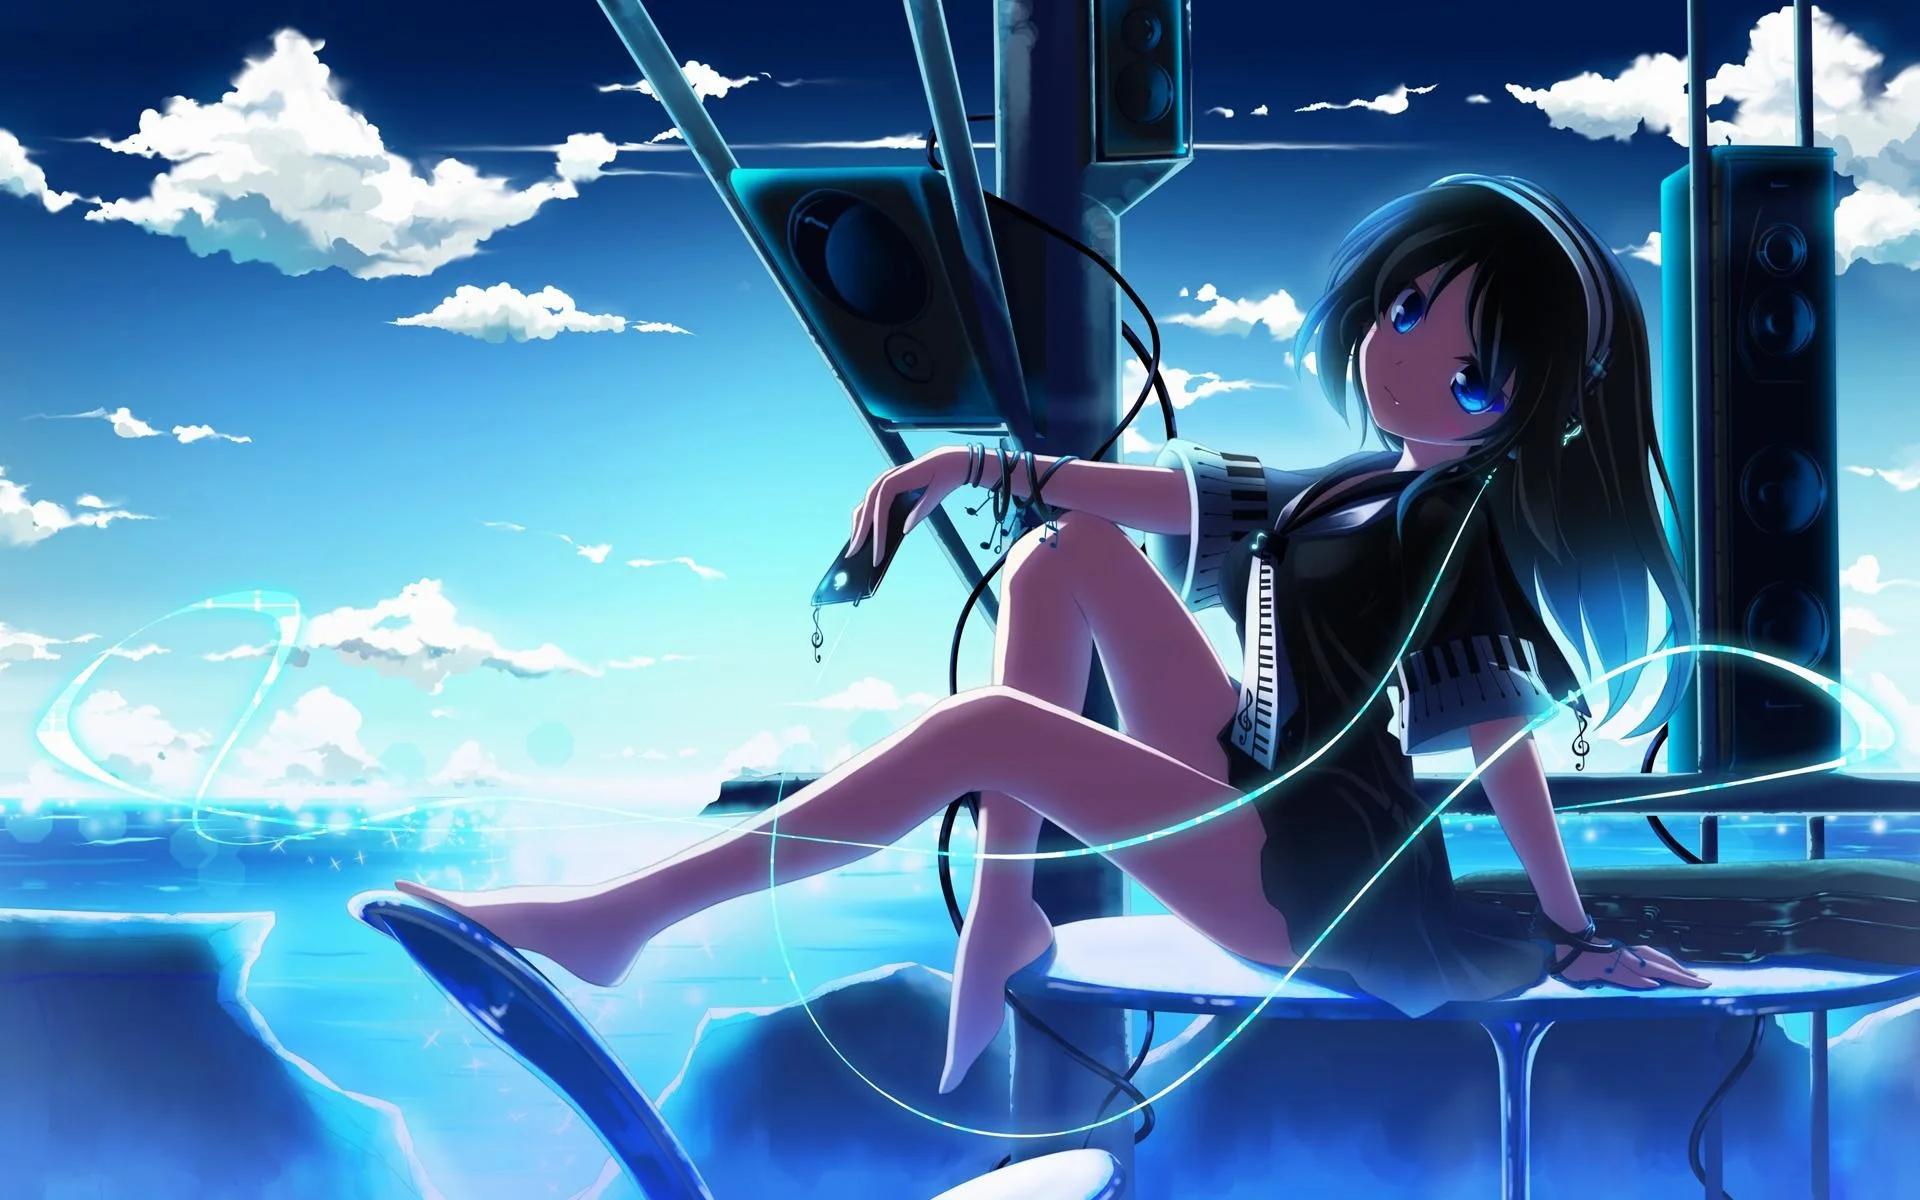 Wallpaper.wiki Anime Music Wallpapers HD PIC WPC0012378